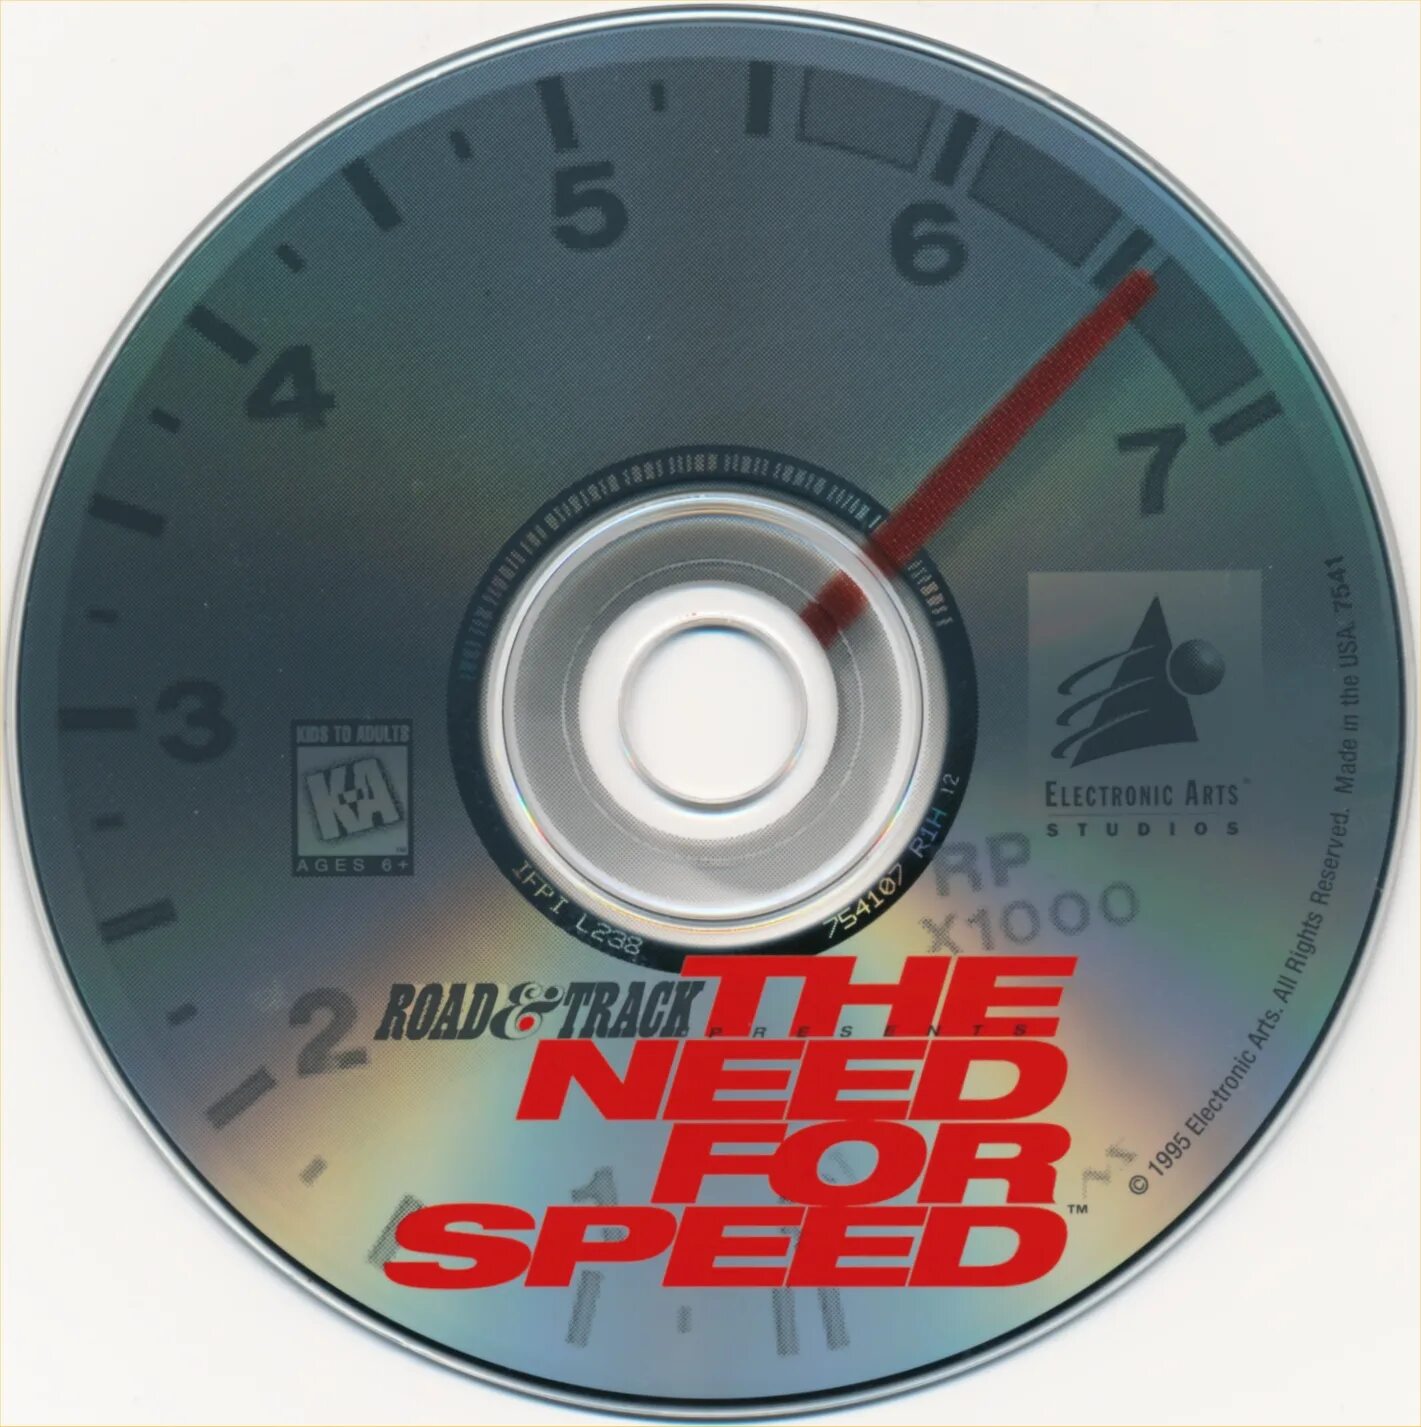 Скорость cd. Road track presents the need for Speed ps1. Need for Speed CD Disc. Ps1 диски. Need for Speed 1 ps1.